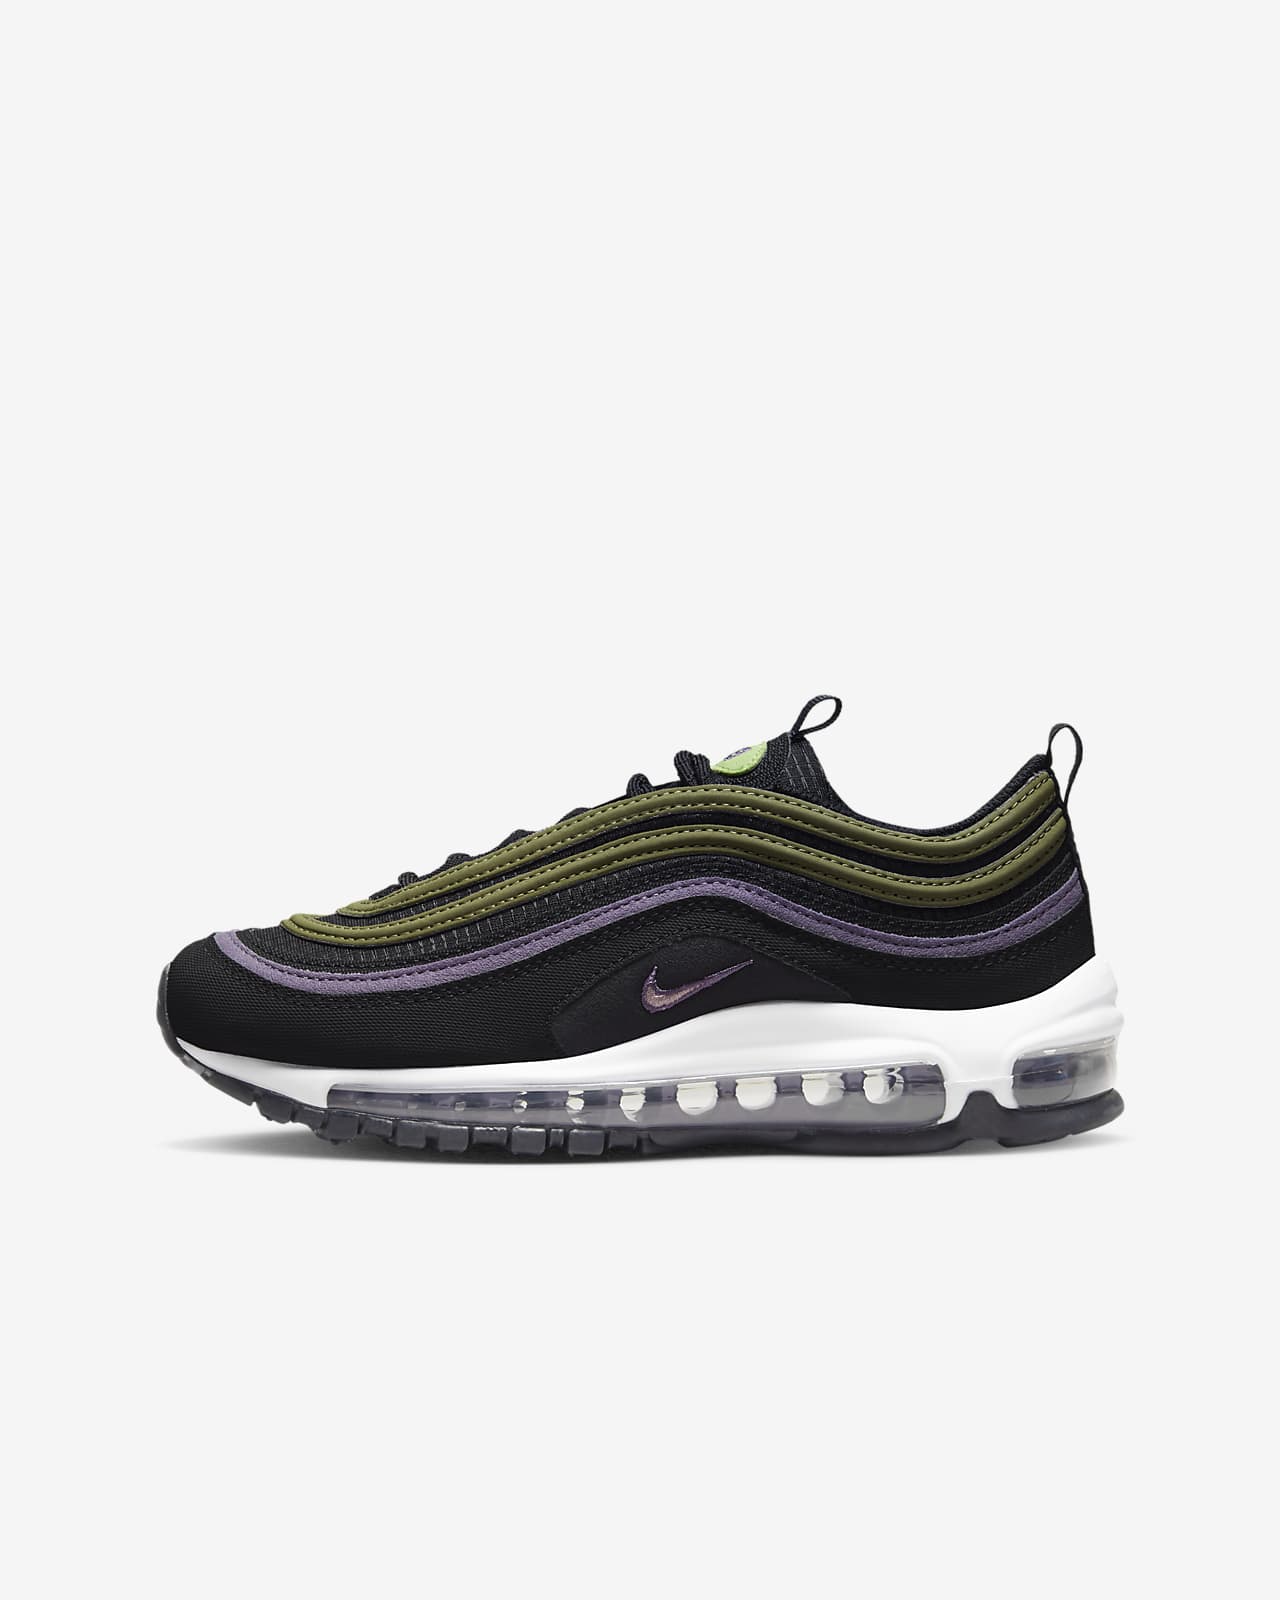 purple and turquoise air max 97